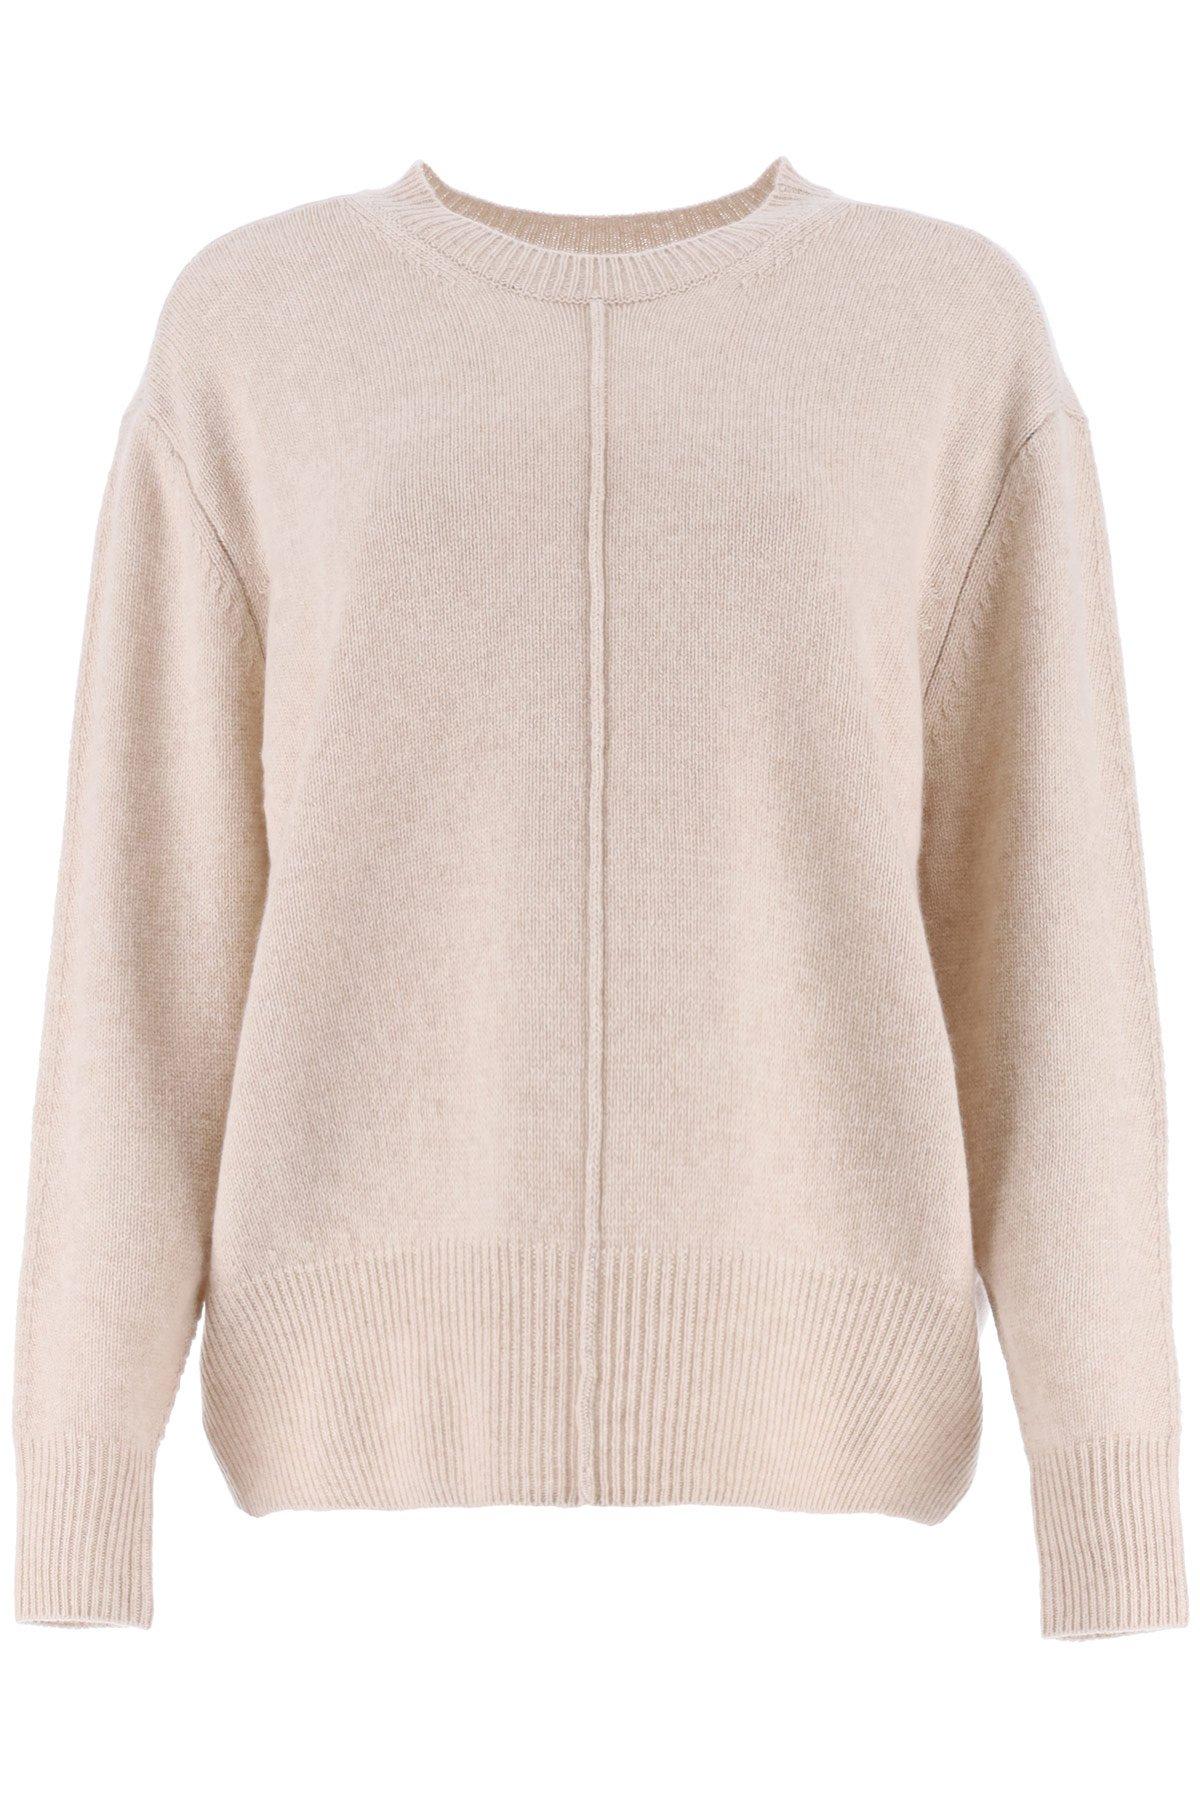 Isabel Marant Cashmere Crewneck Knitted Sweater in Beige (Natural ...